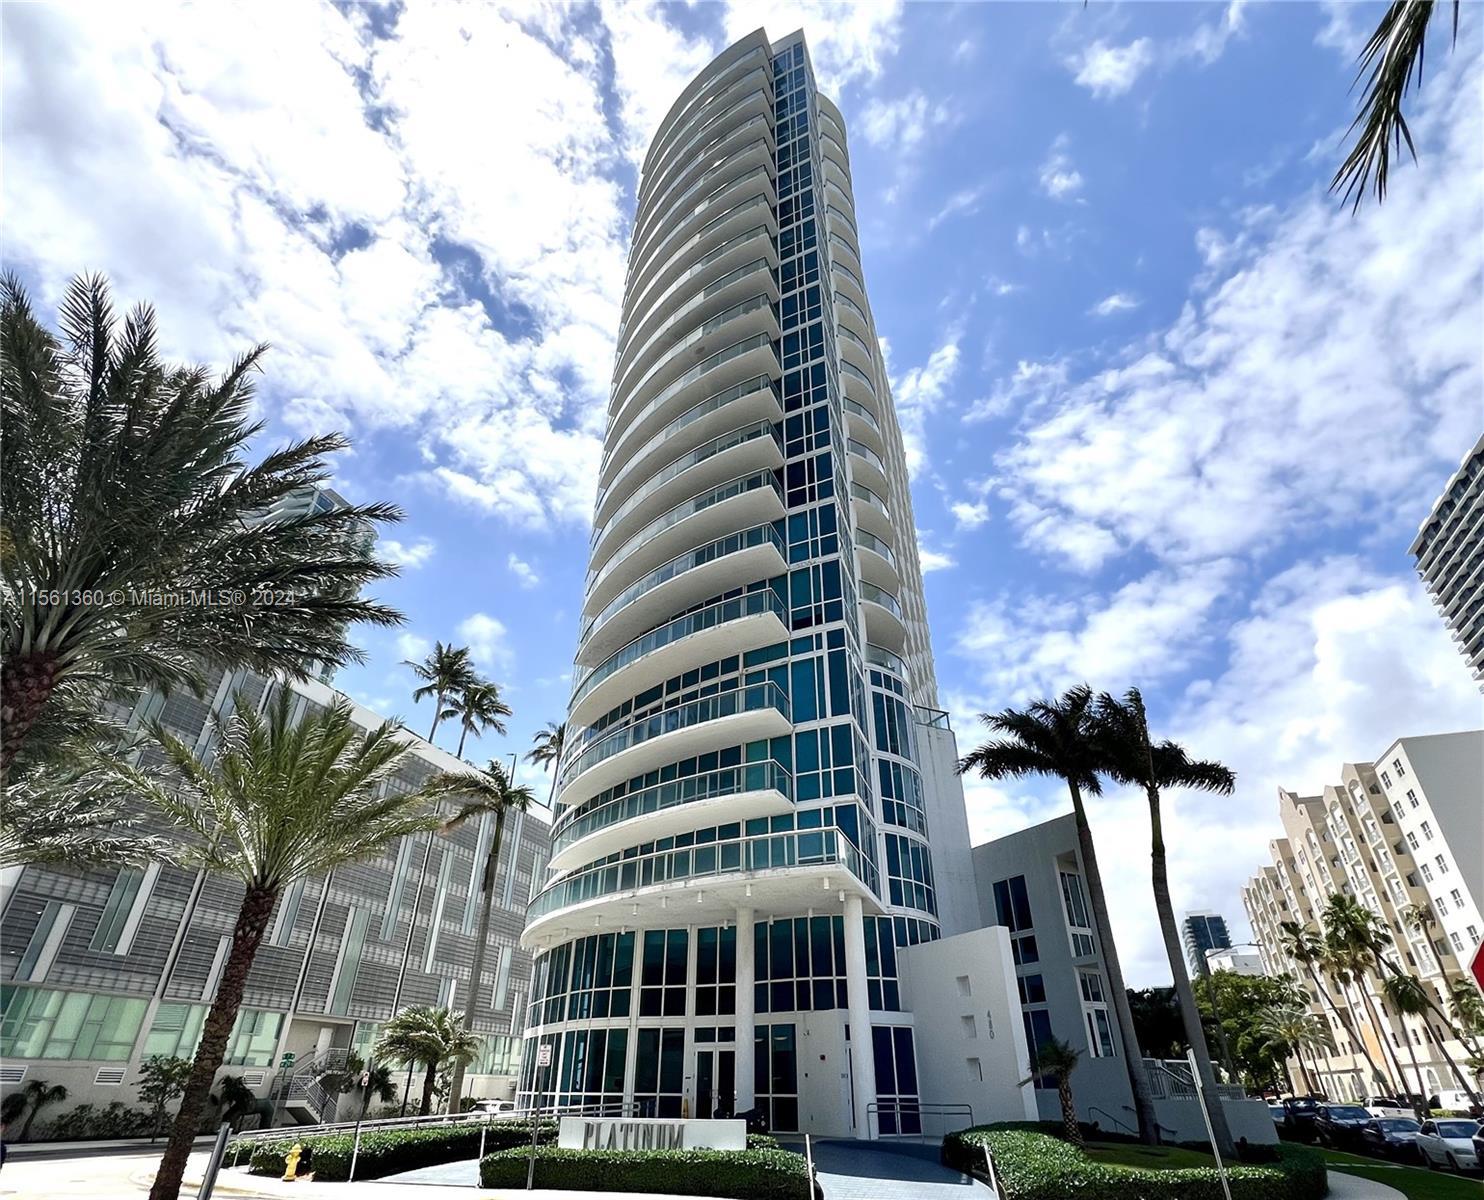 Beautiful oversized modern condo with 1 bed/1 1/2 baths, two curved glass balconies, and floor-to-ce